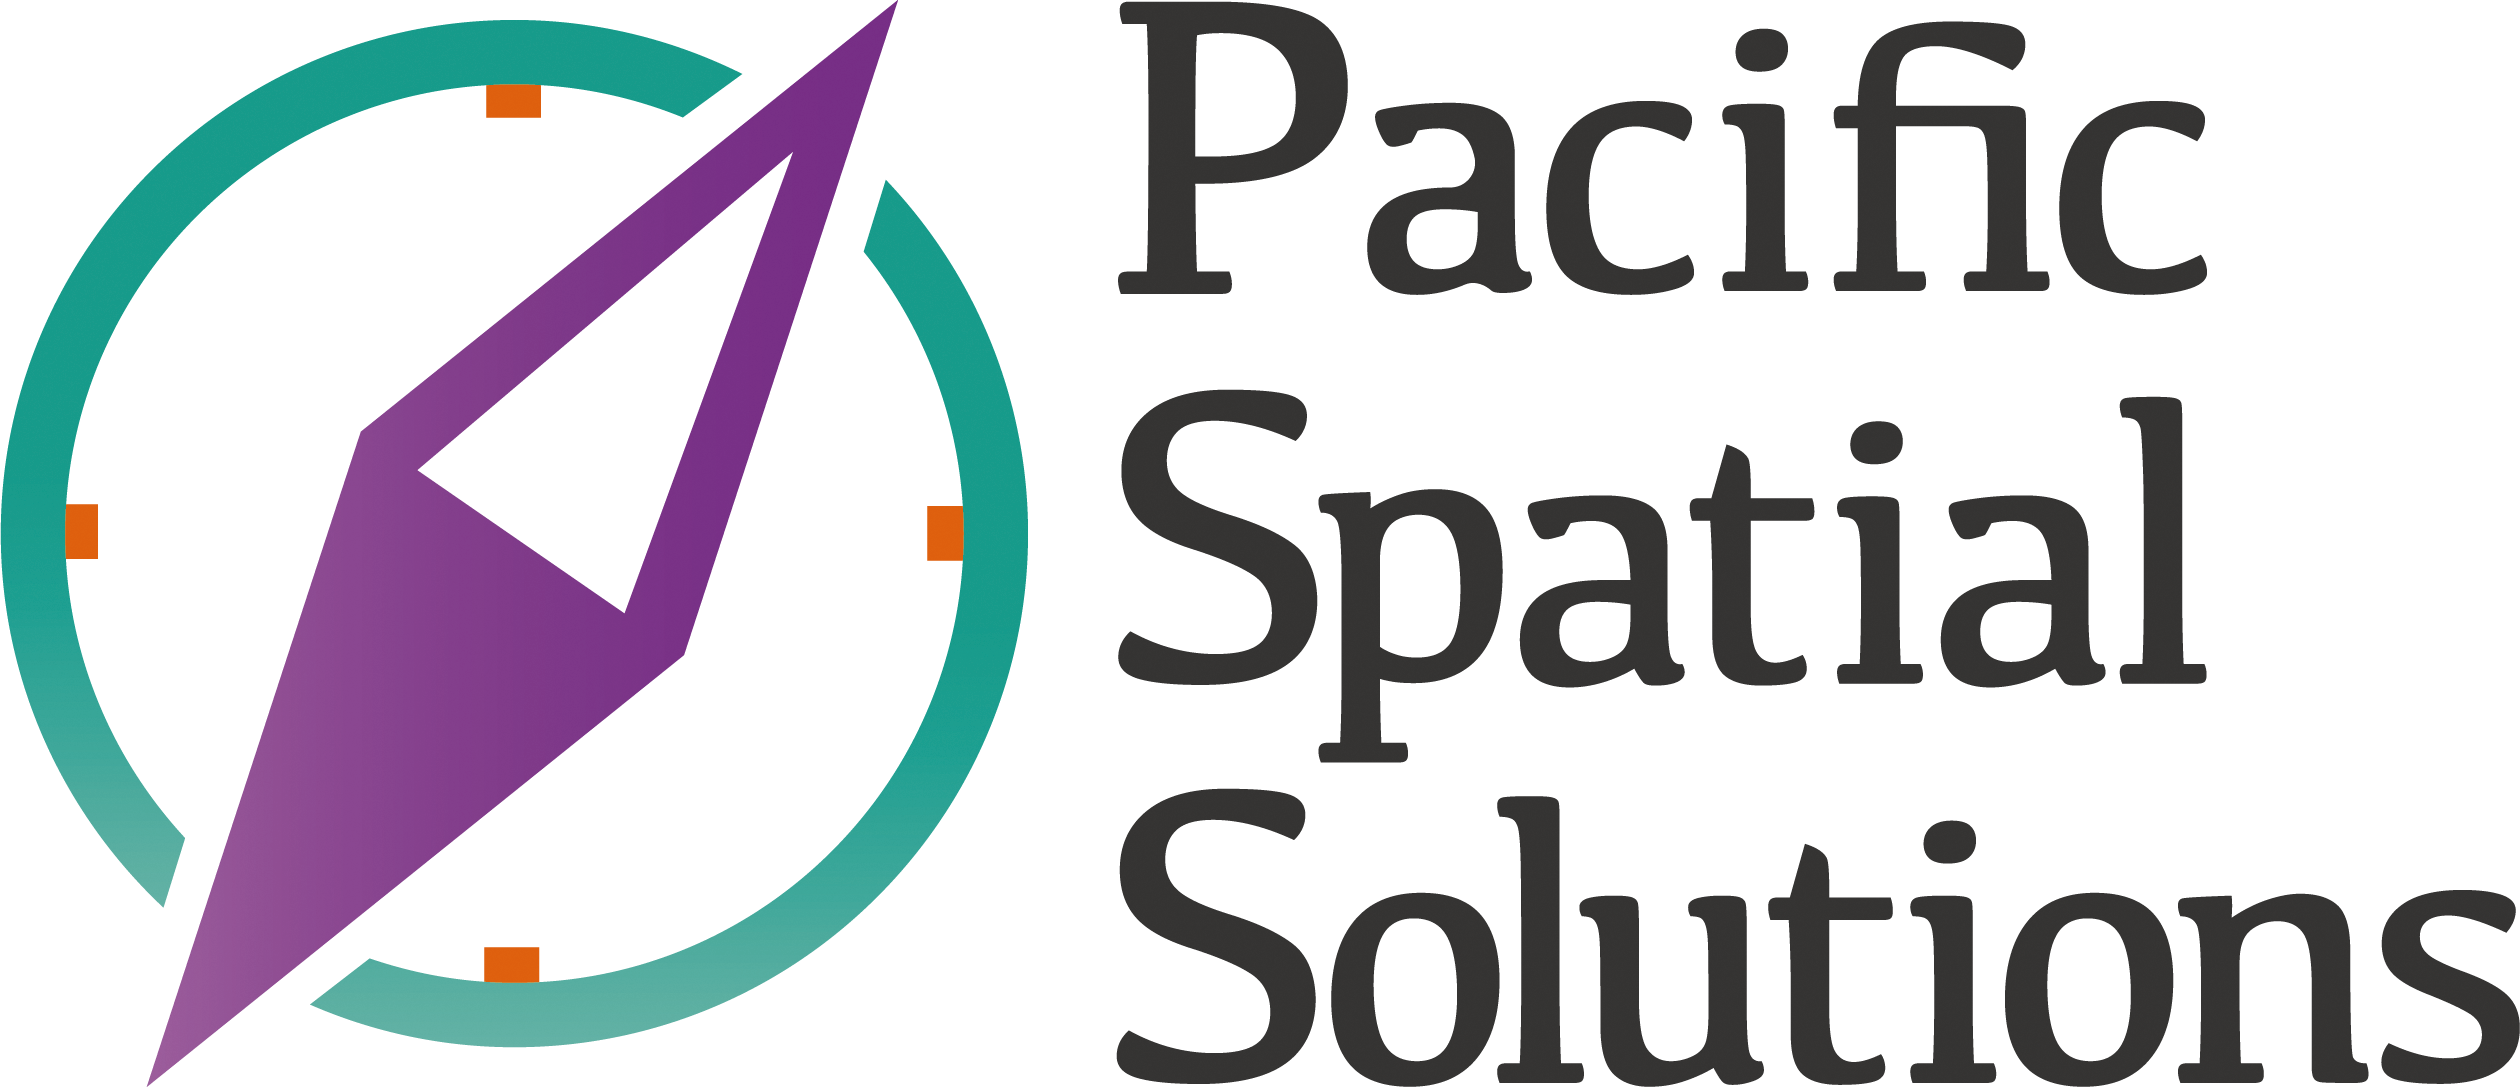 Pacific Spatial Solutions Co., Ltd.